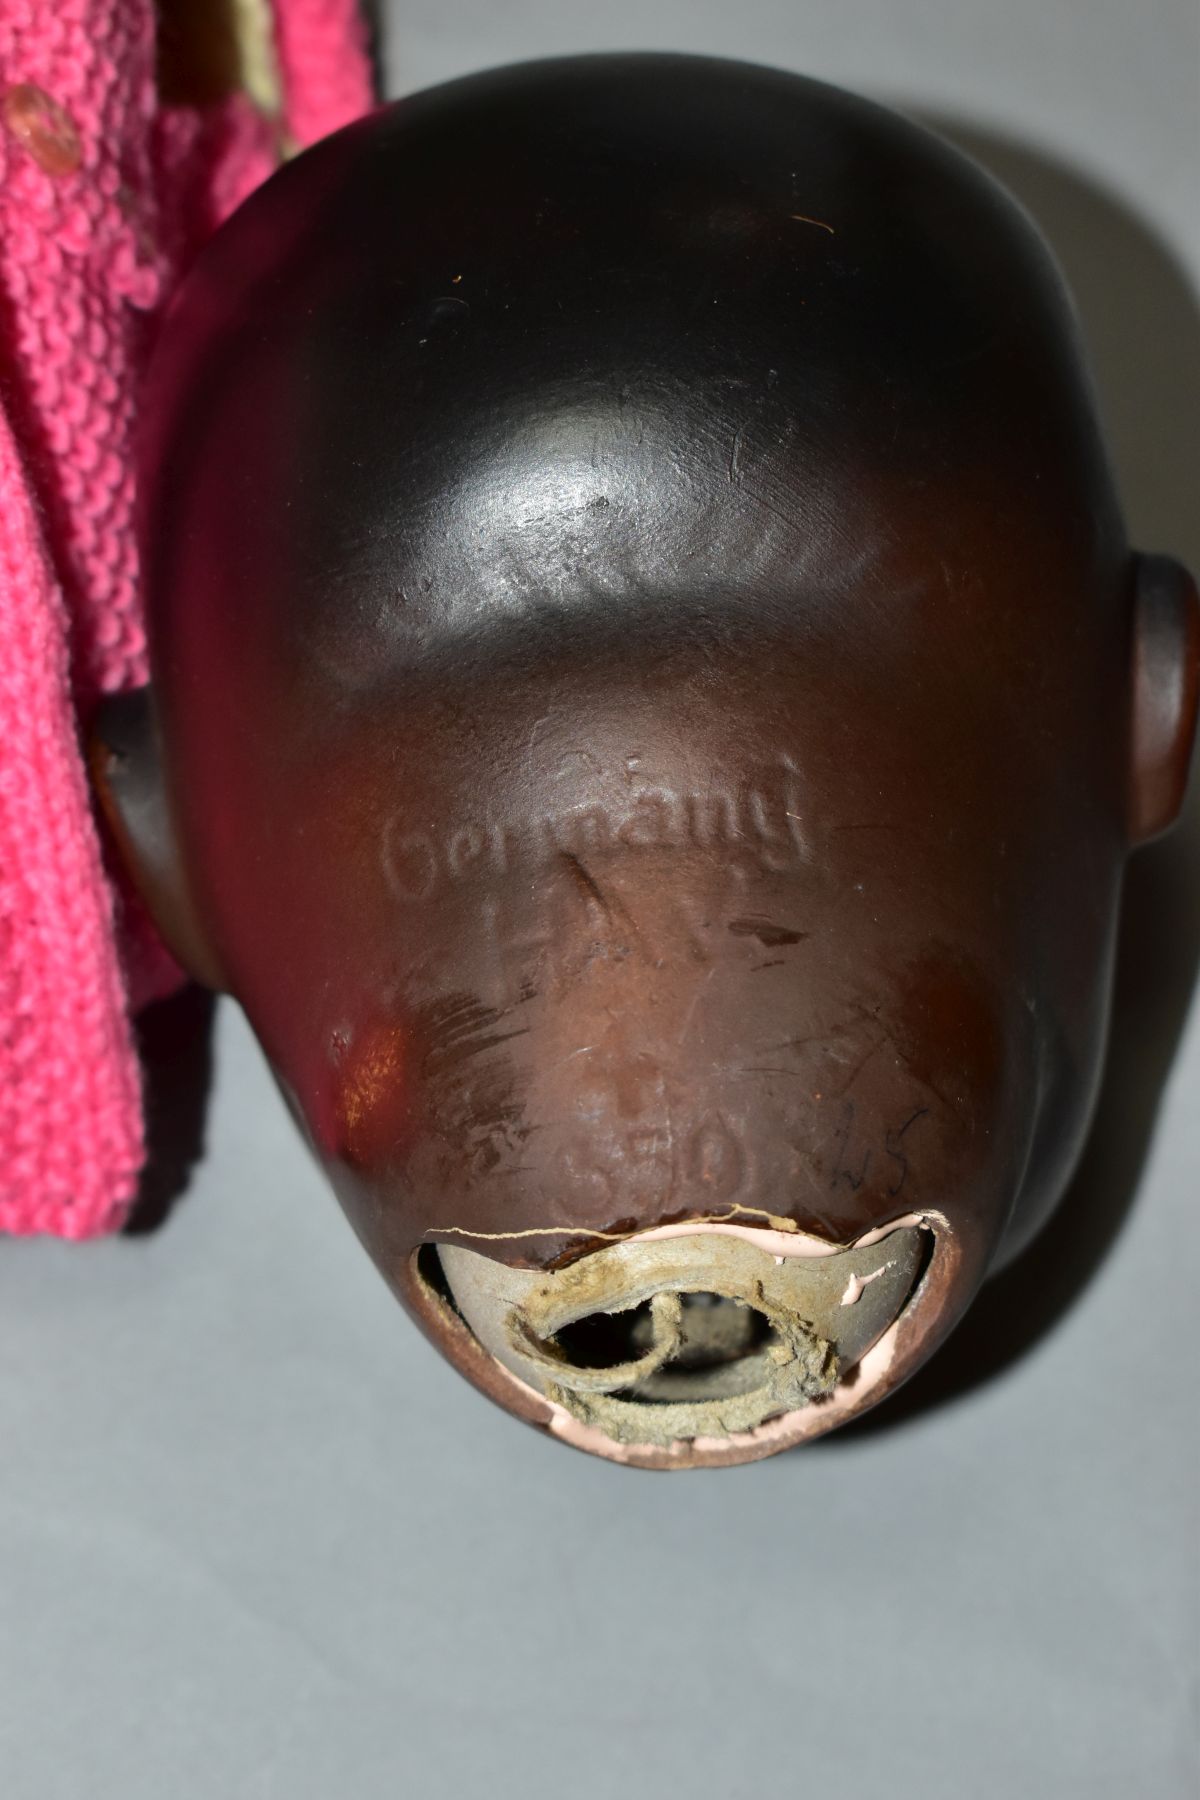 A BISQUE HEAD BABY DOLL, nape of neck marked 'Germany H W 4 350', so possibly Hugo Wiegand, sleeping - Image 6 of 7